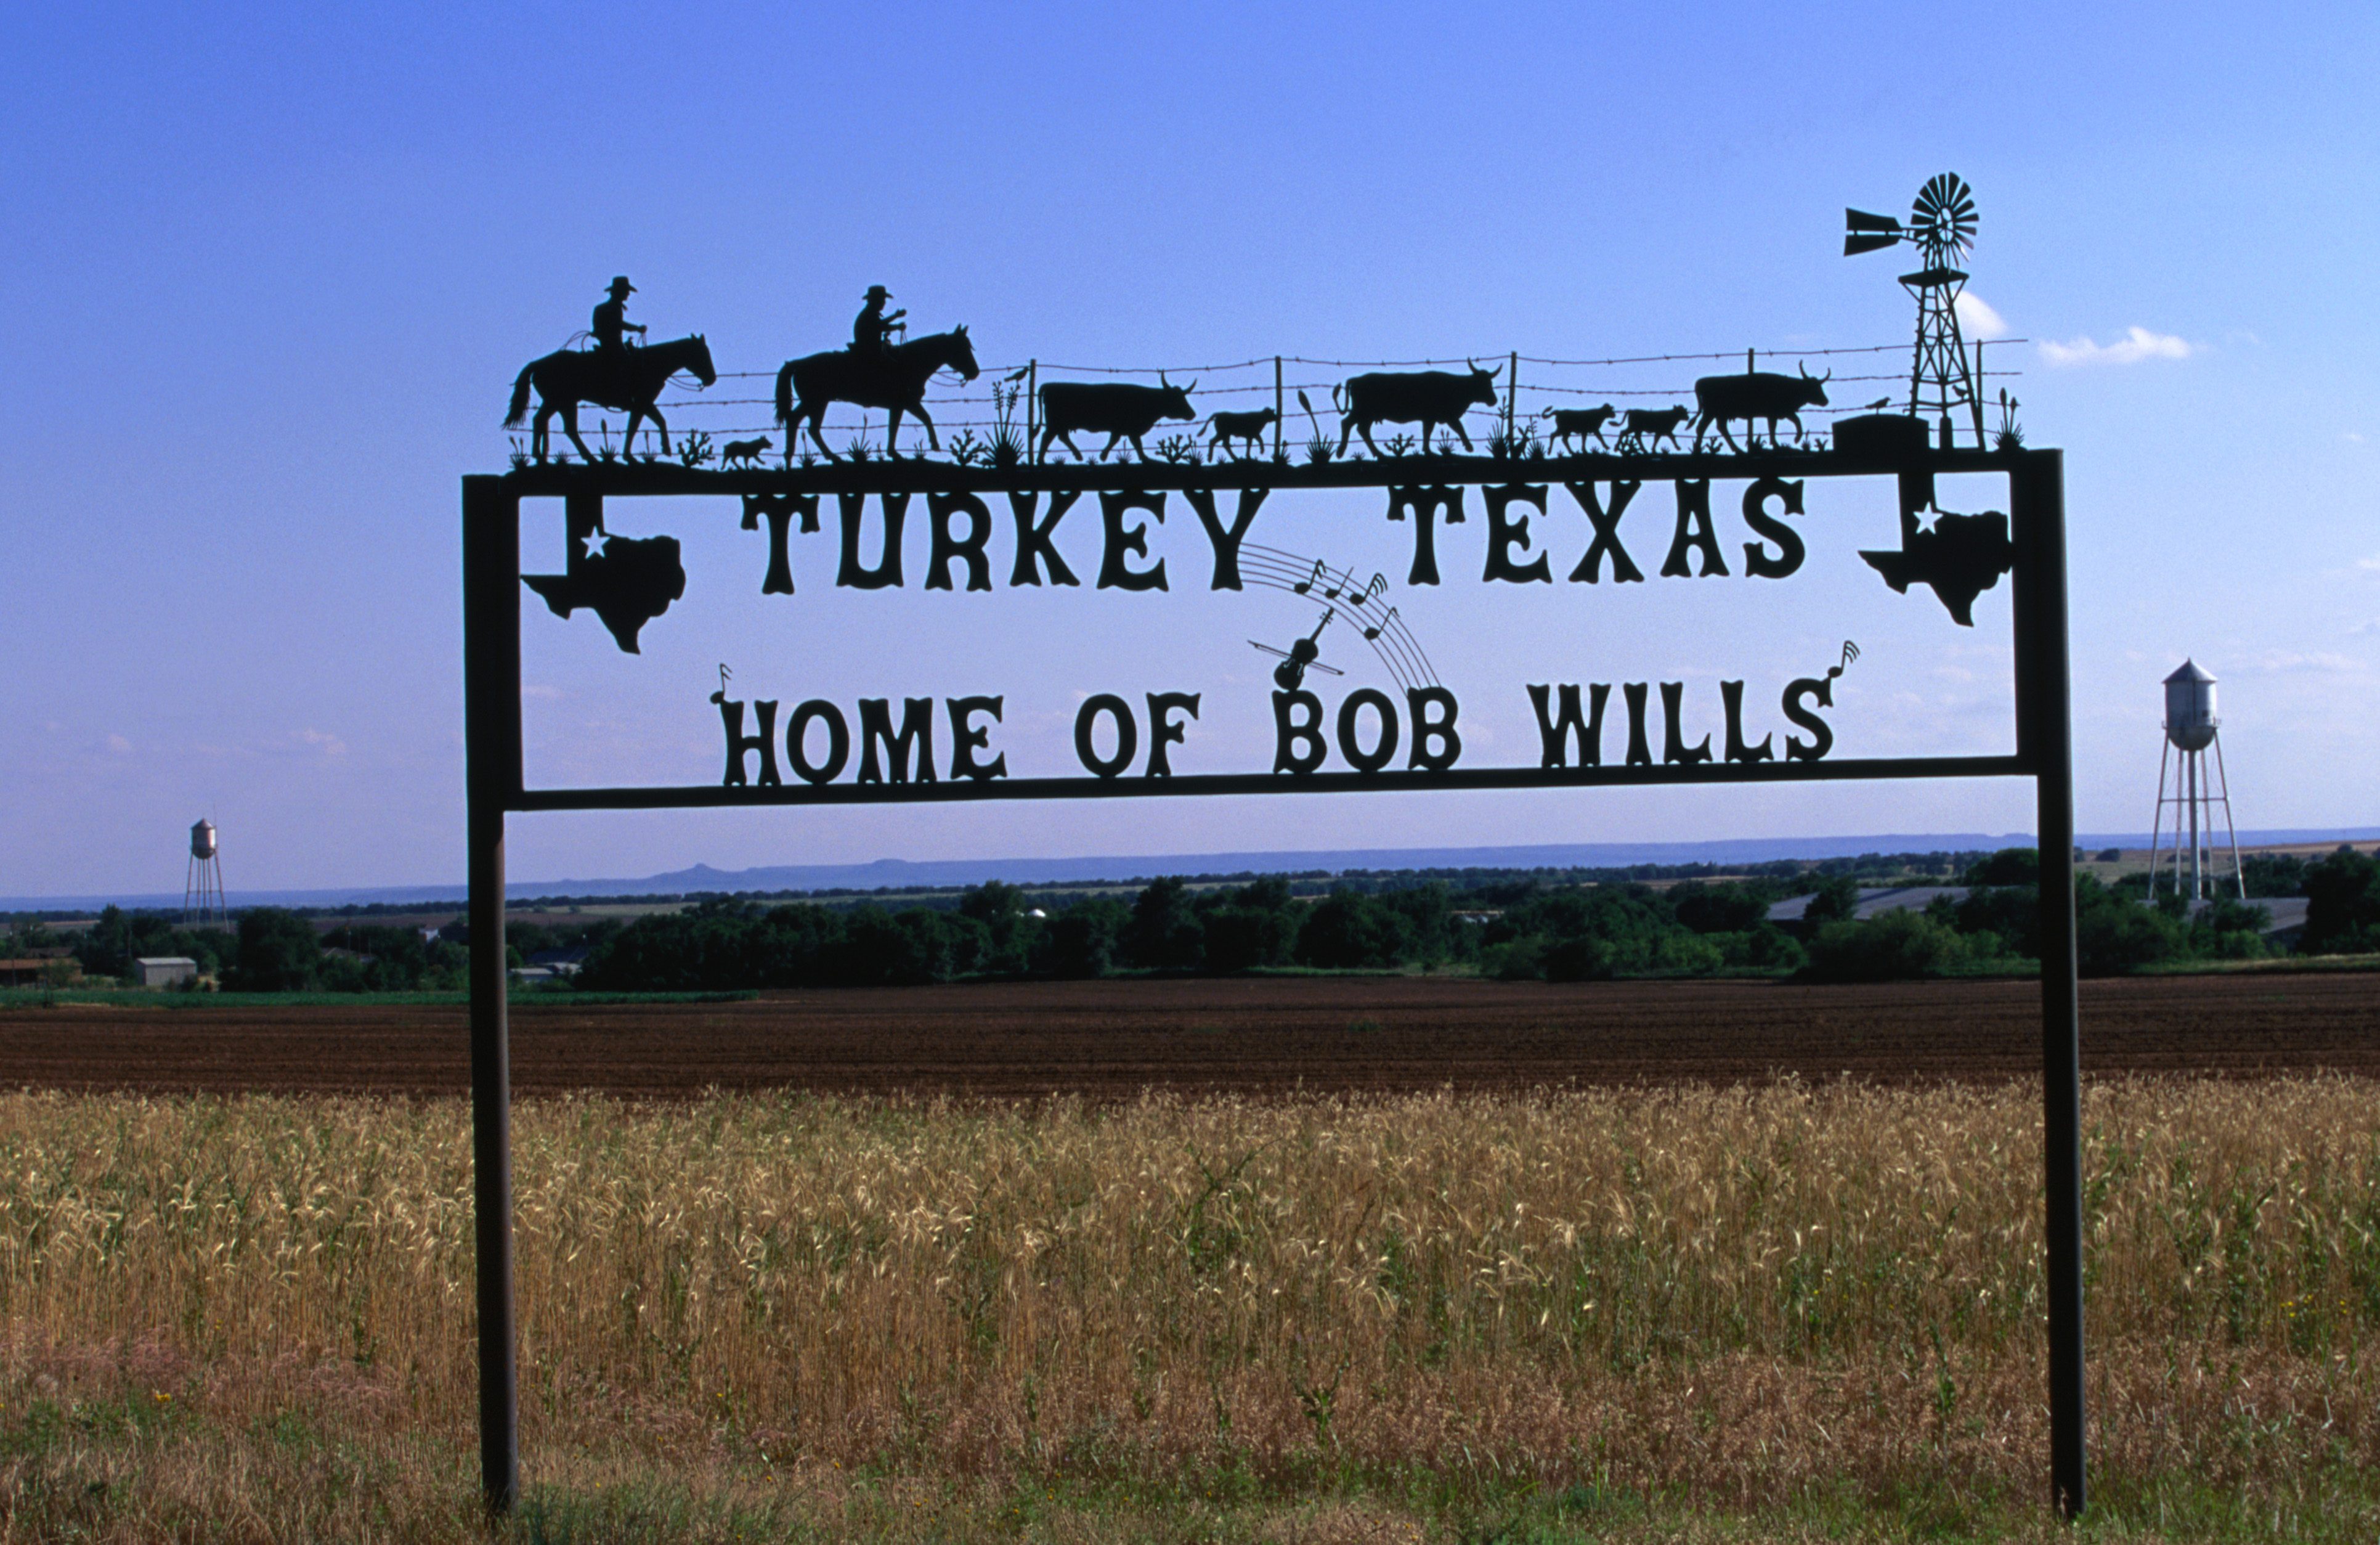 A sign for Turkey Texas, capital of Western Swing music and home of the country musician Bob Wills 